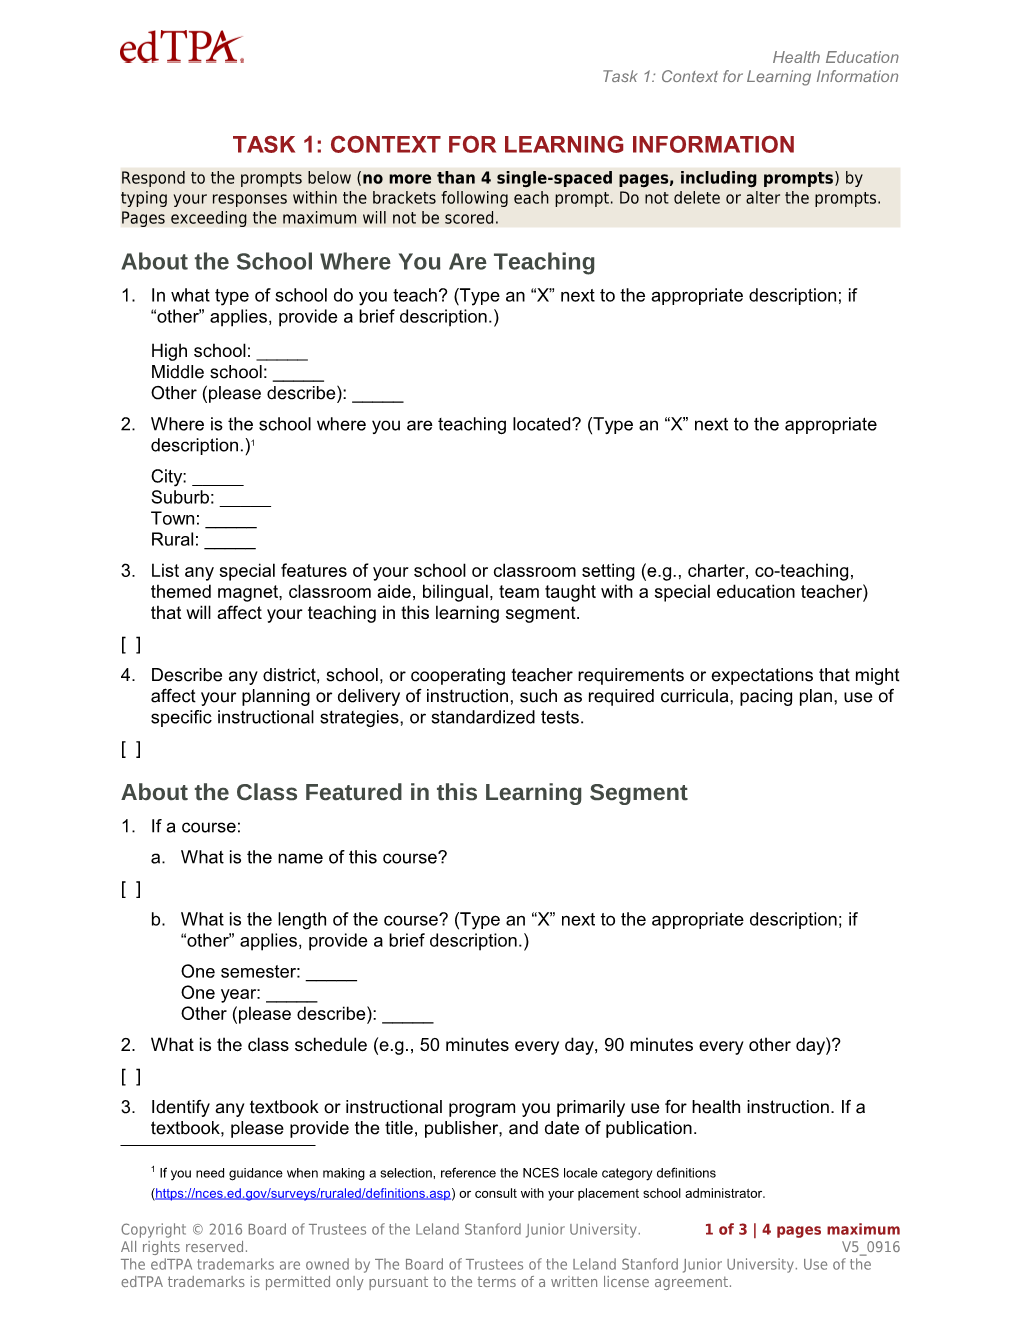 Context for Learning Information Template